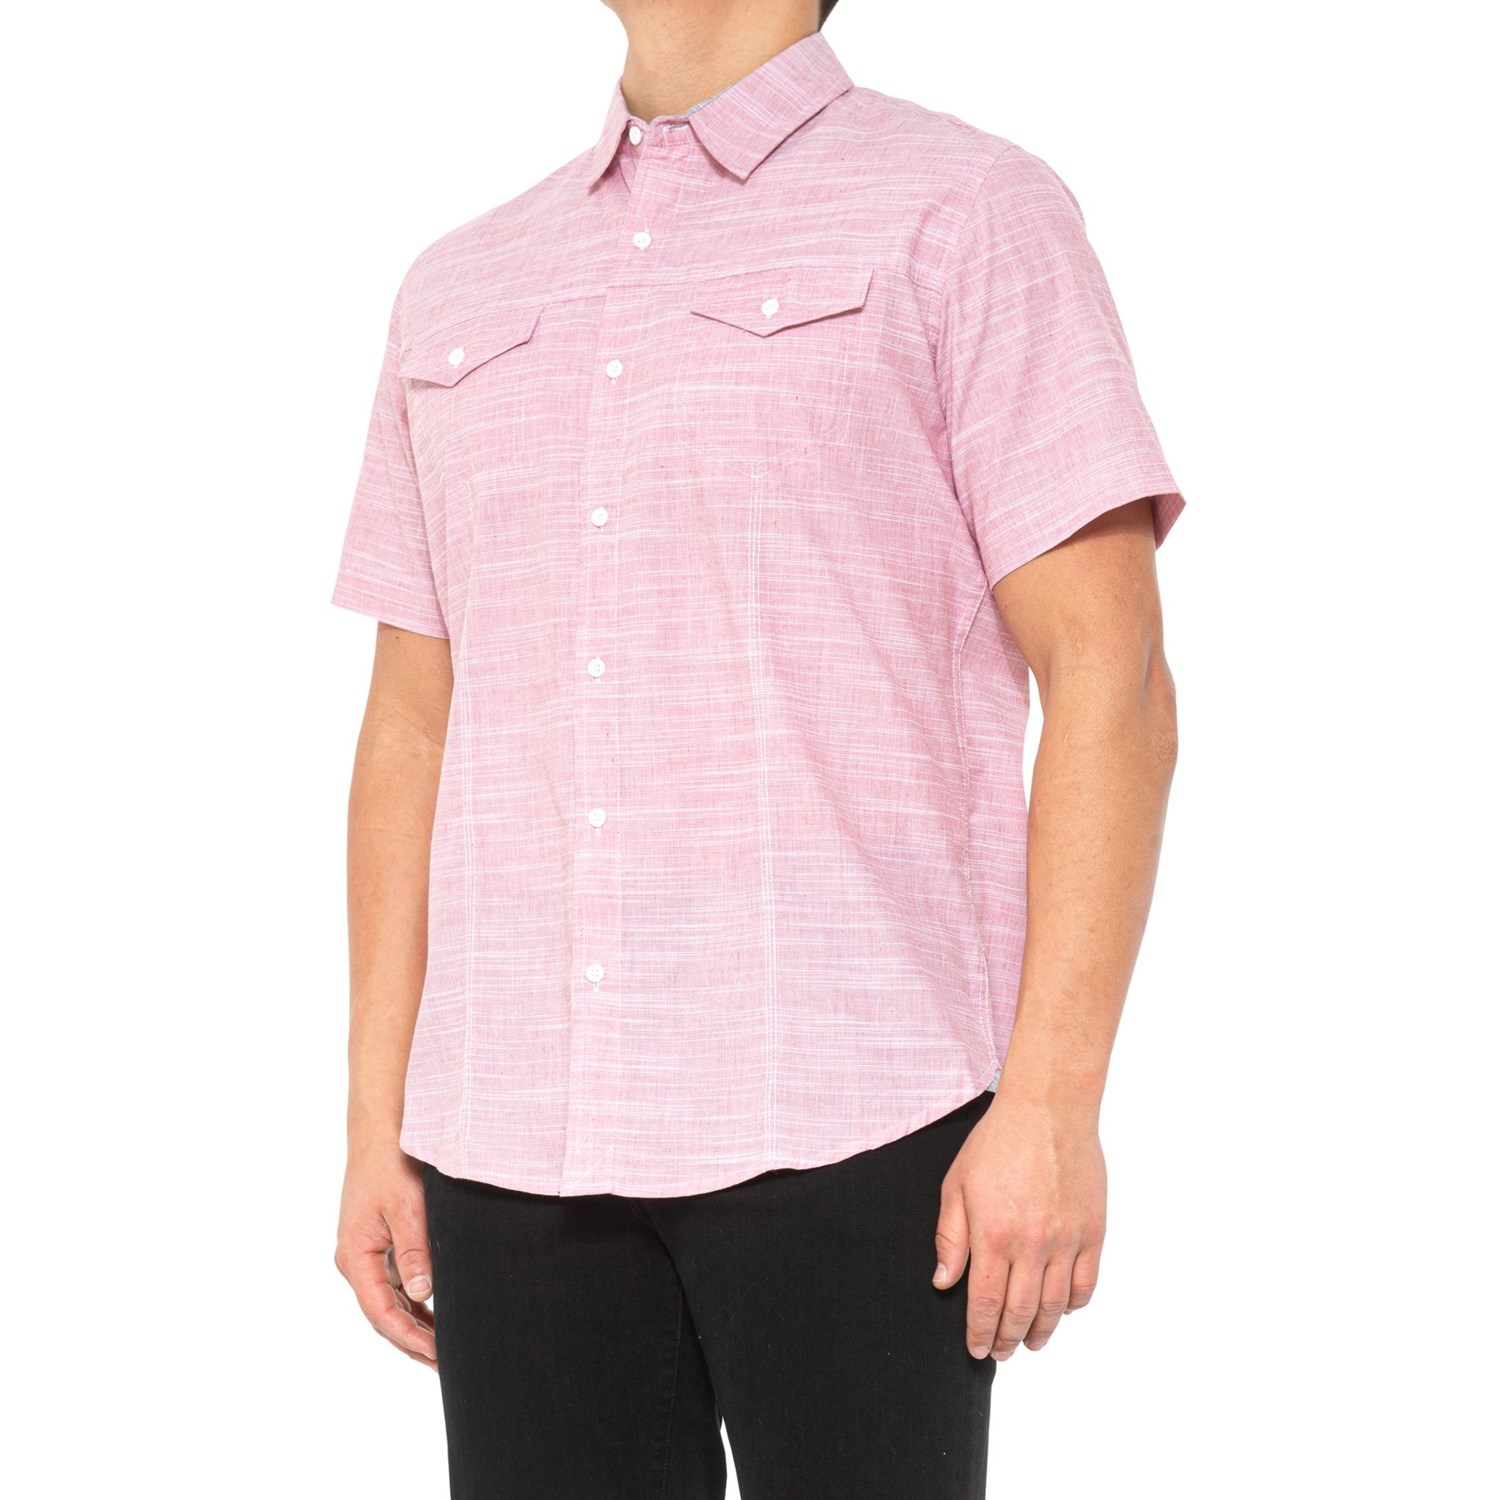 SIERRA PACIFIC Textured Woven Shirt (For Men) - Save 77%